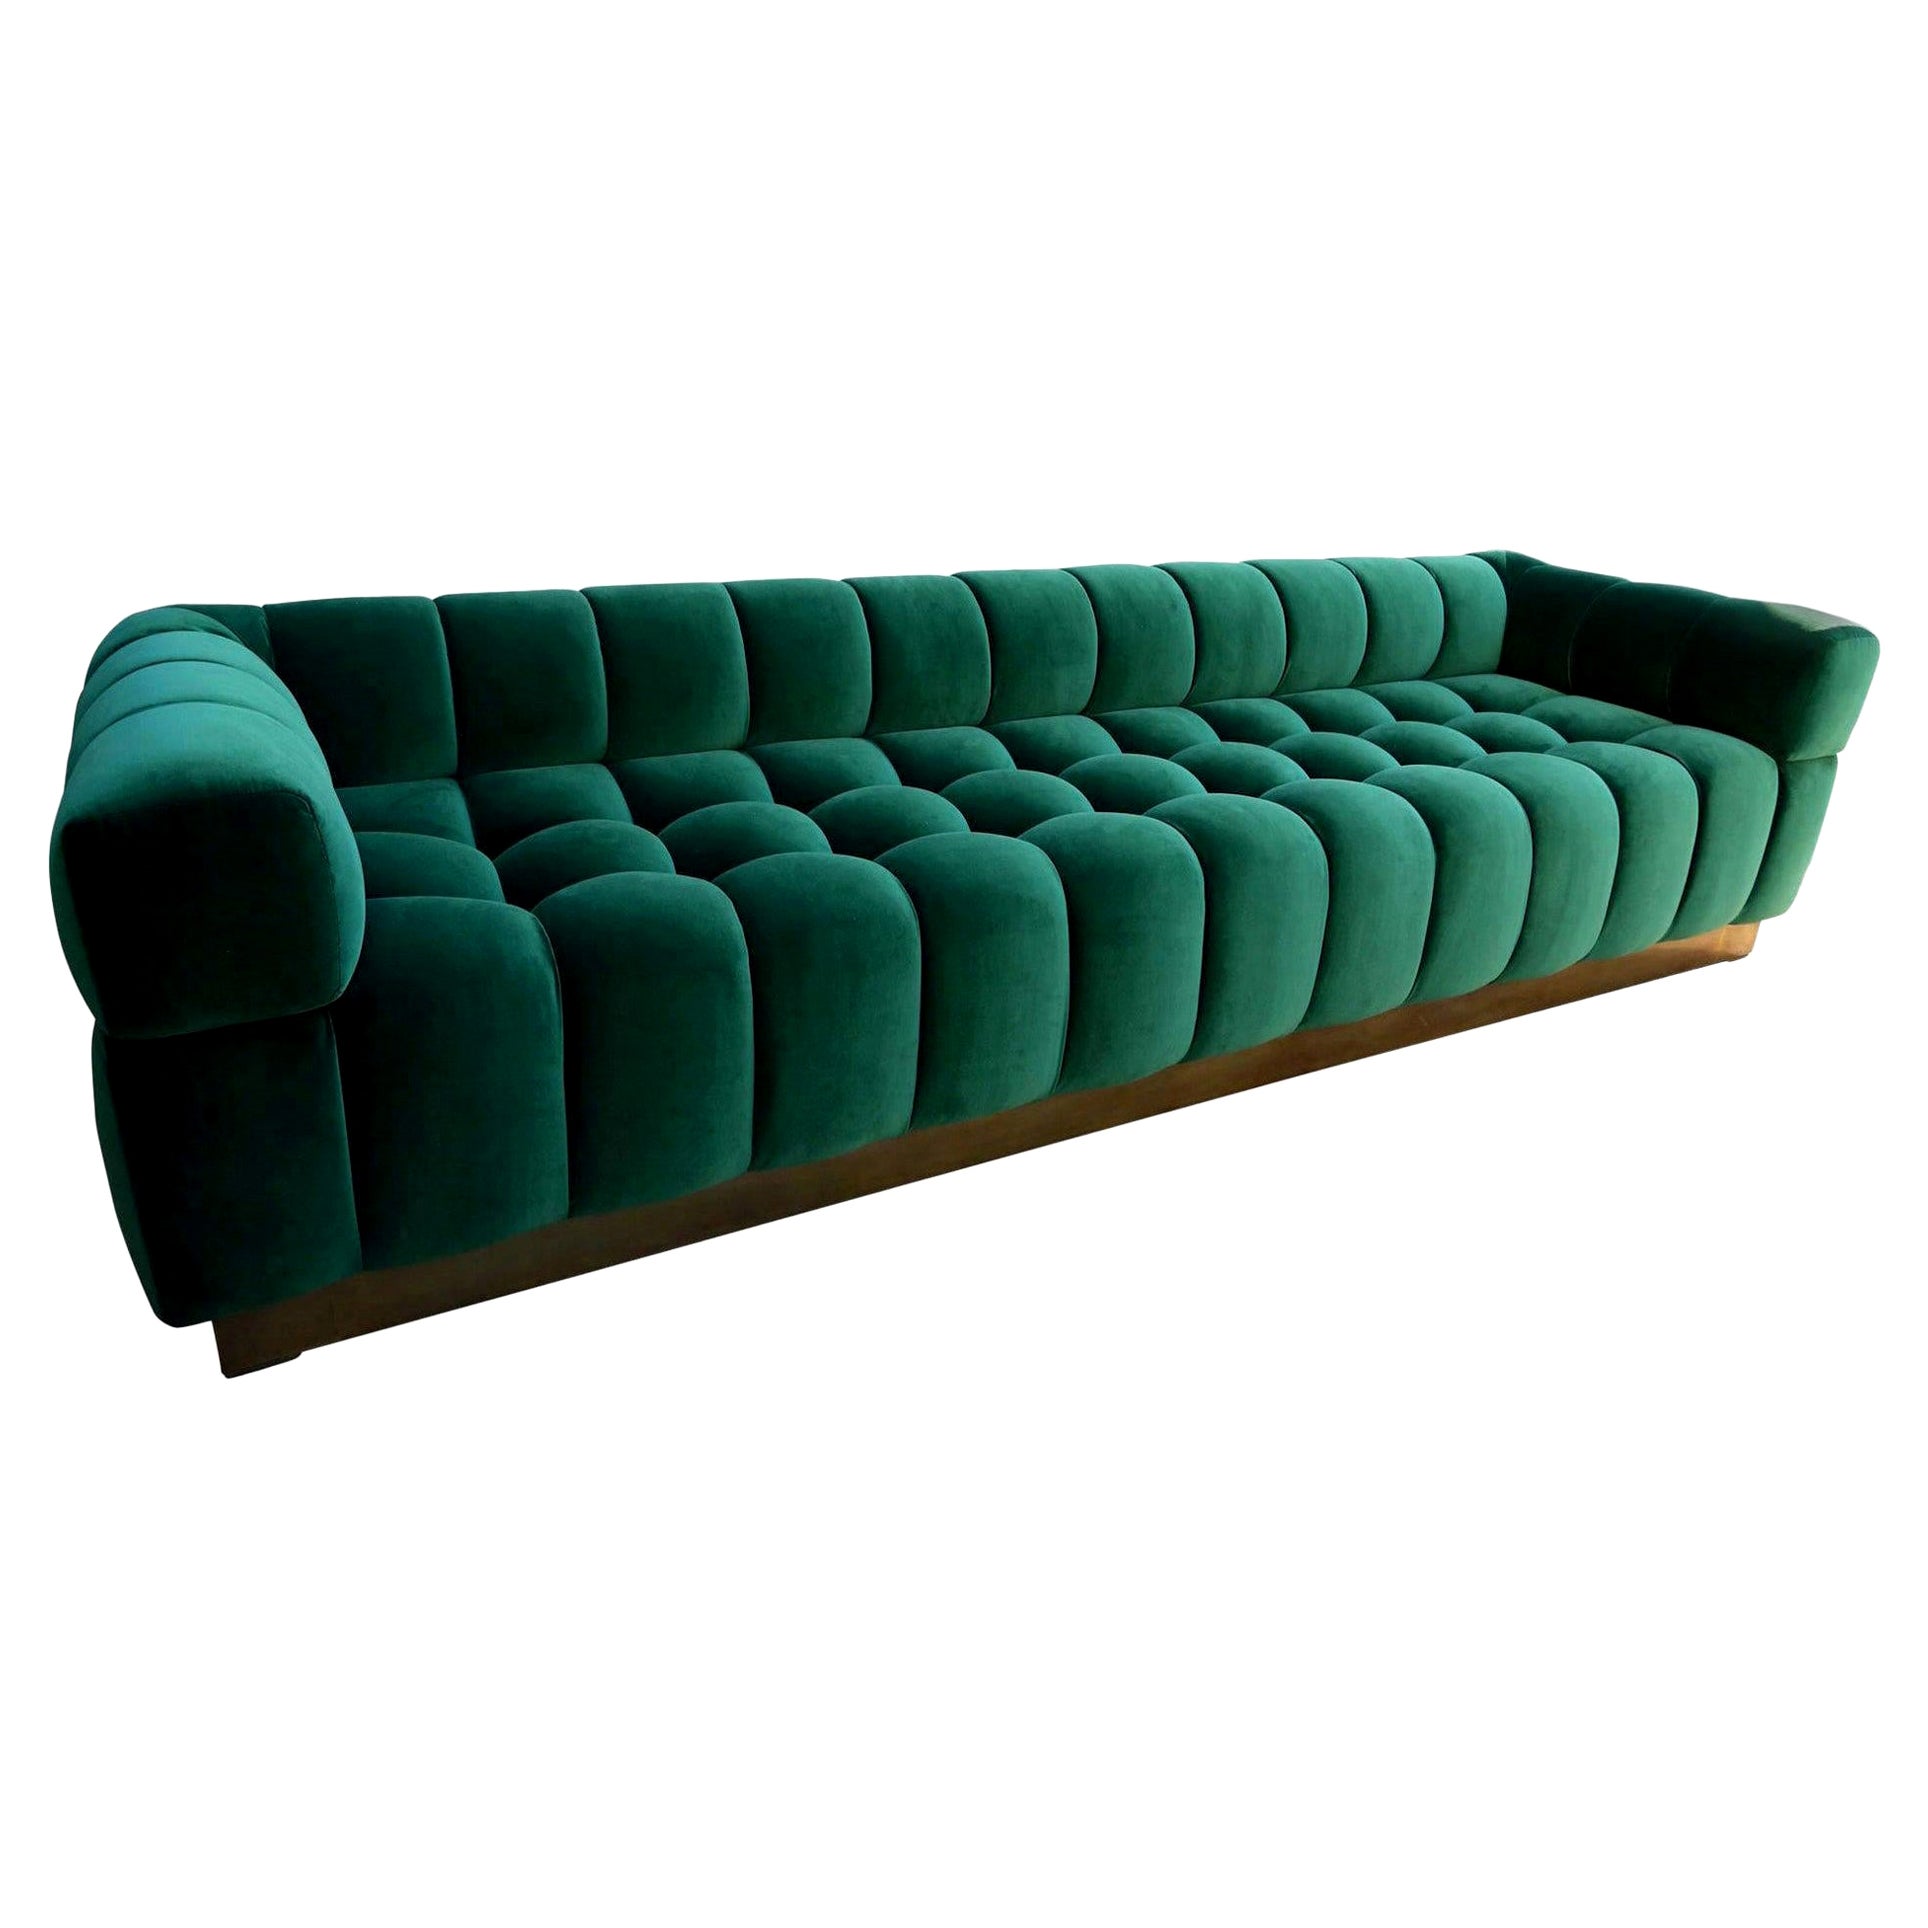 Custom Tufted Green Velvet Sofa with Brass Base by Adesso Imports For Sale